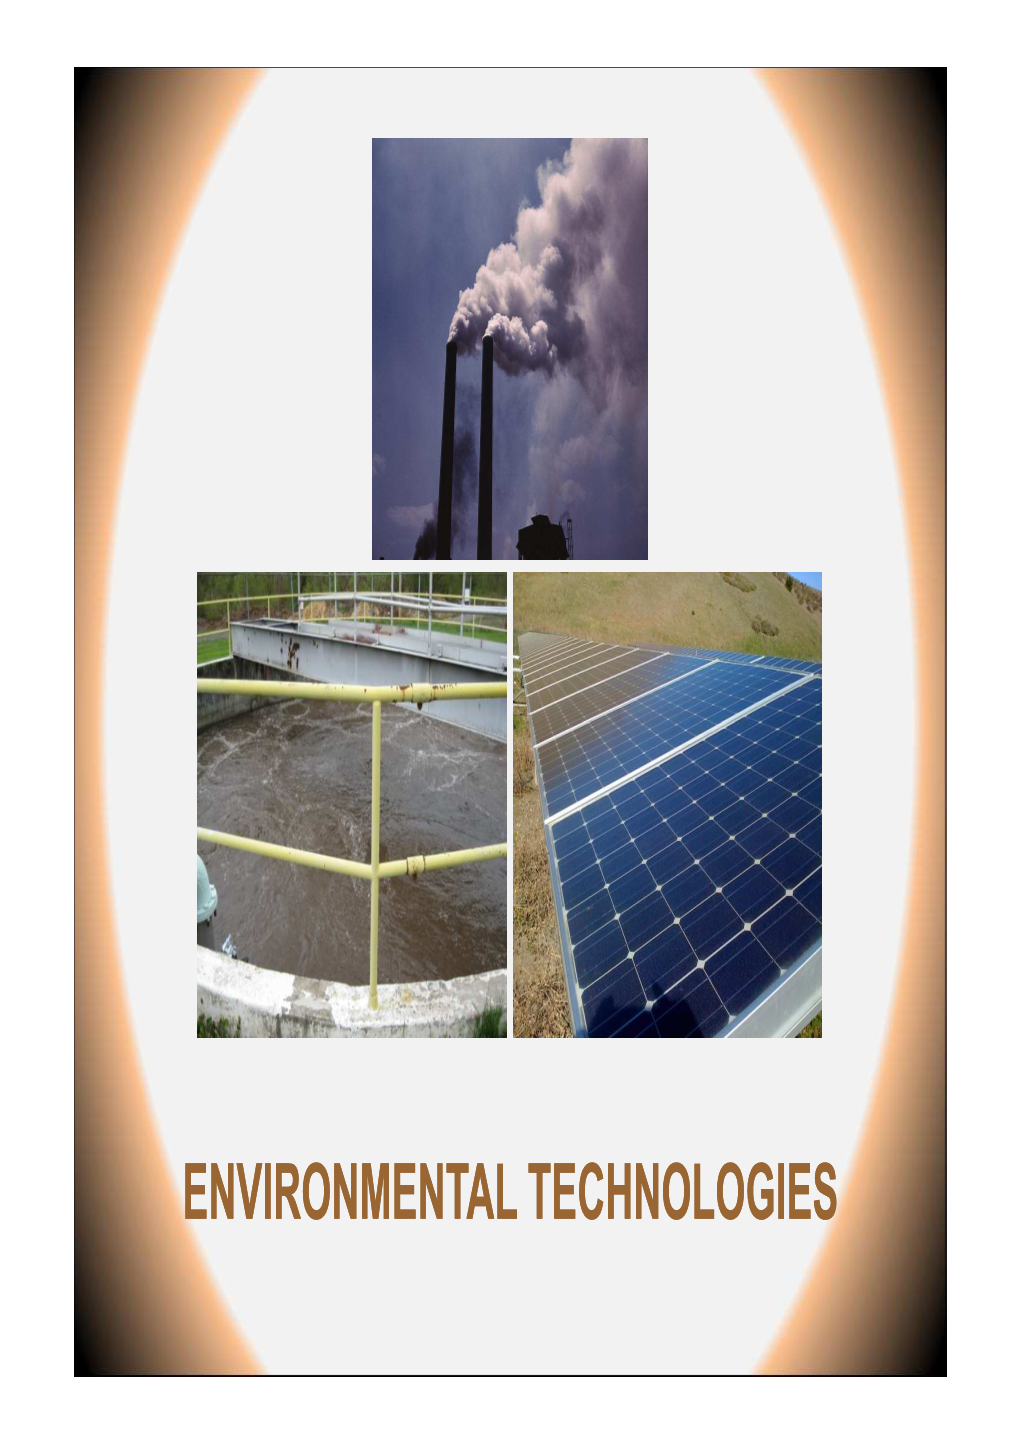 15.LECTURE-Environmental Technologies [Compatibility Mode]